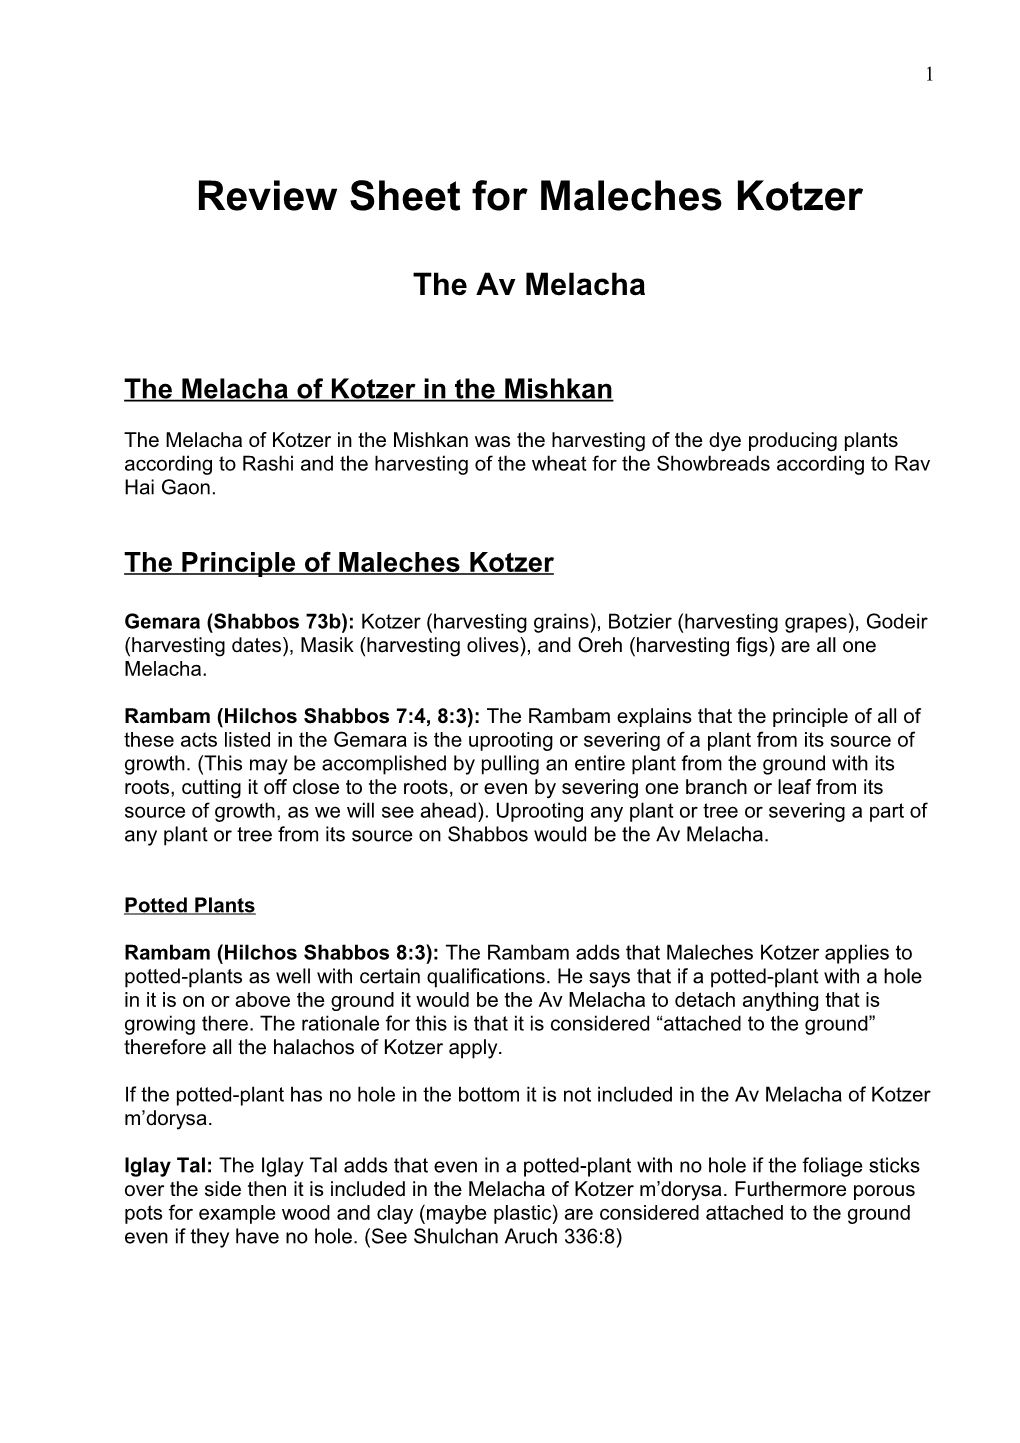 Review Sheet for Maleches Kotzer